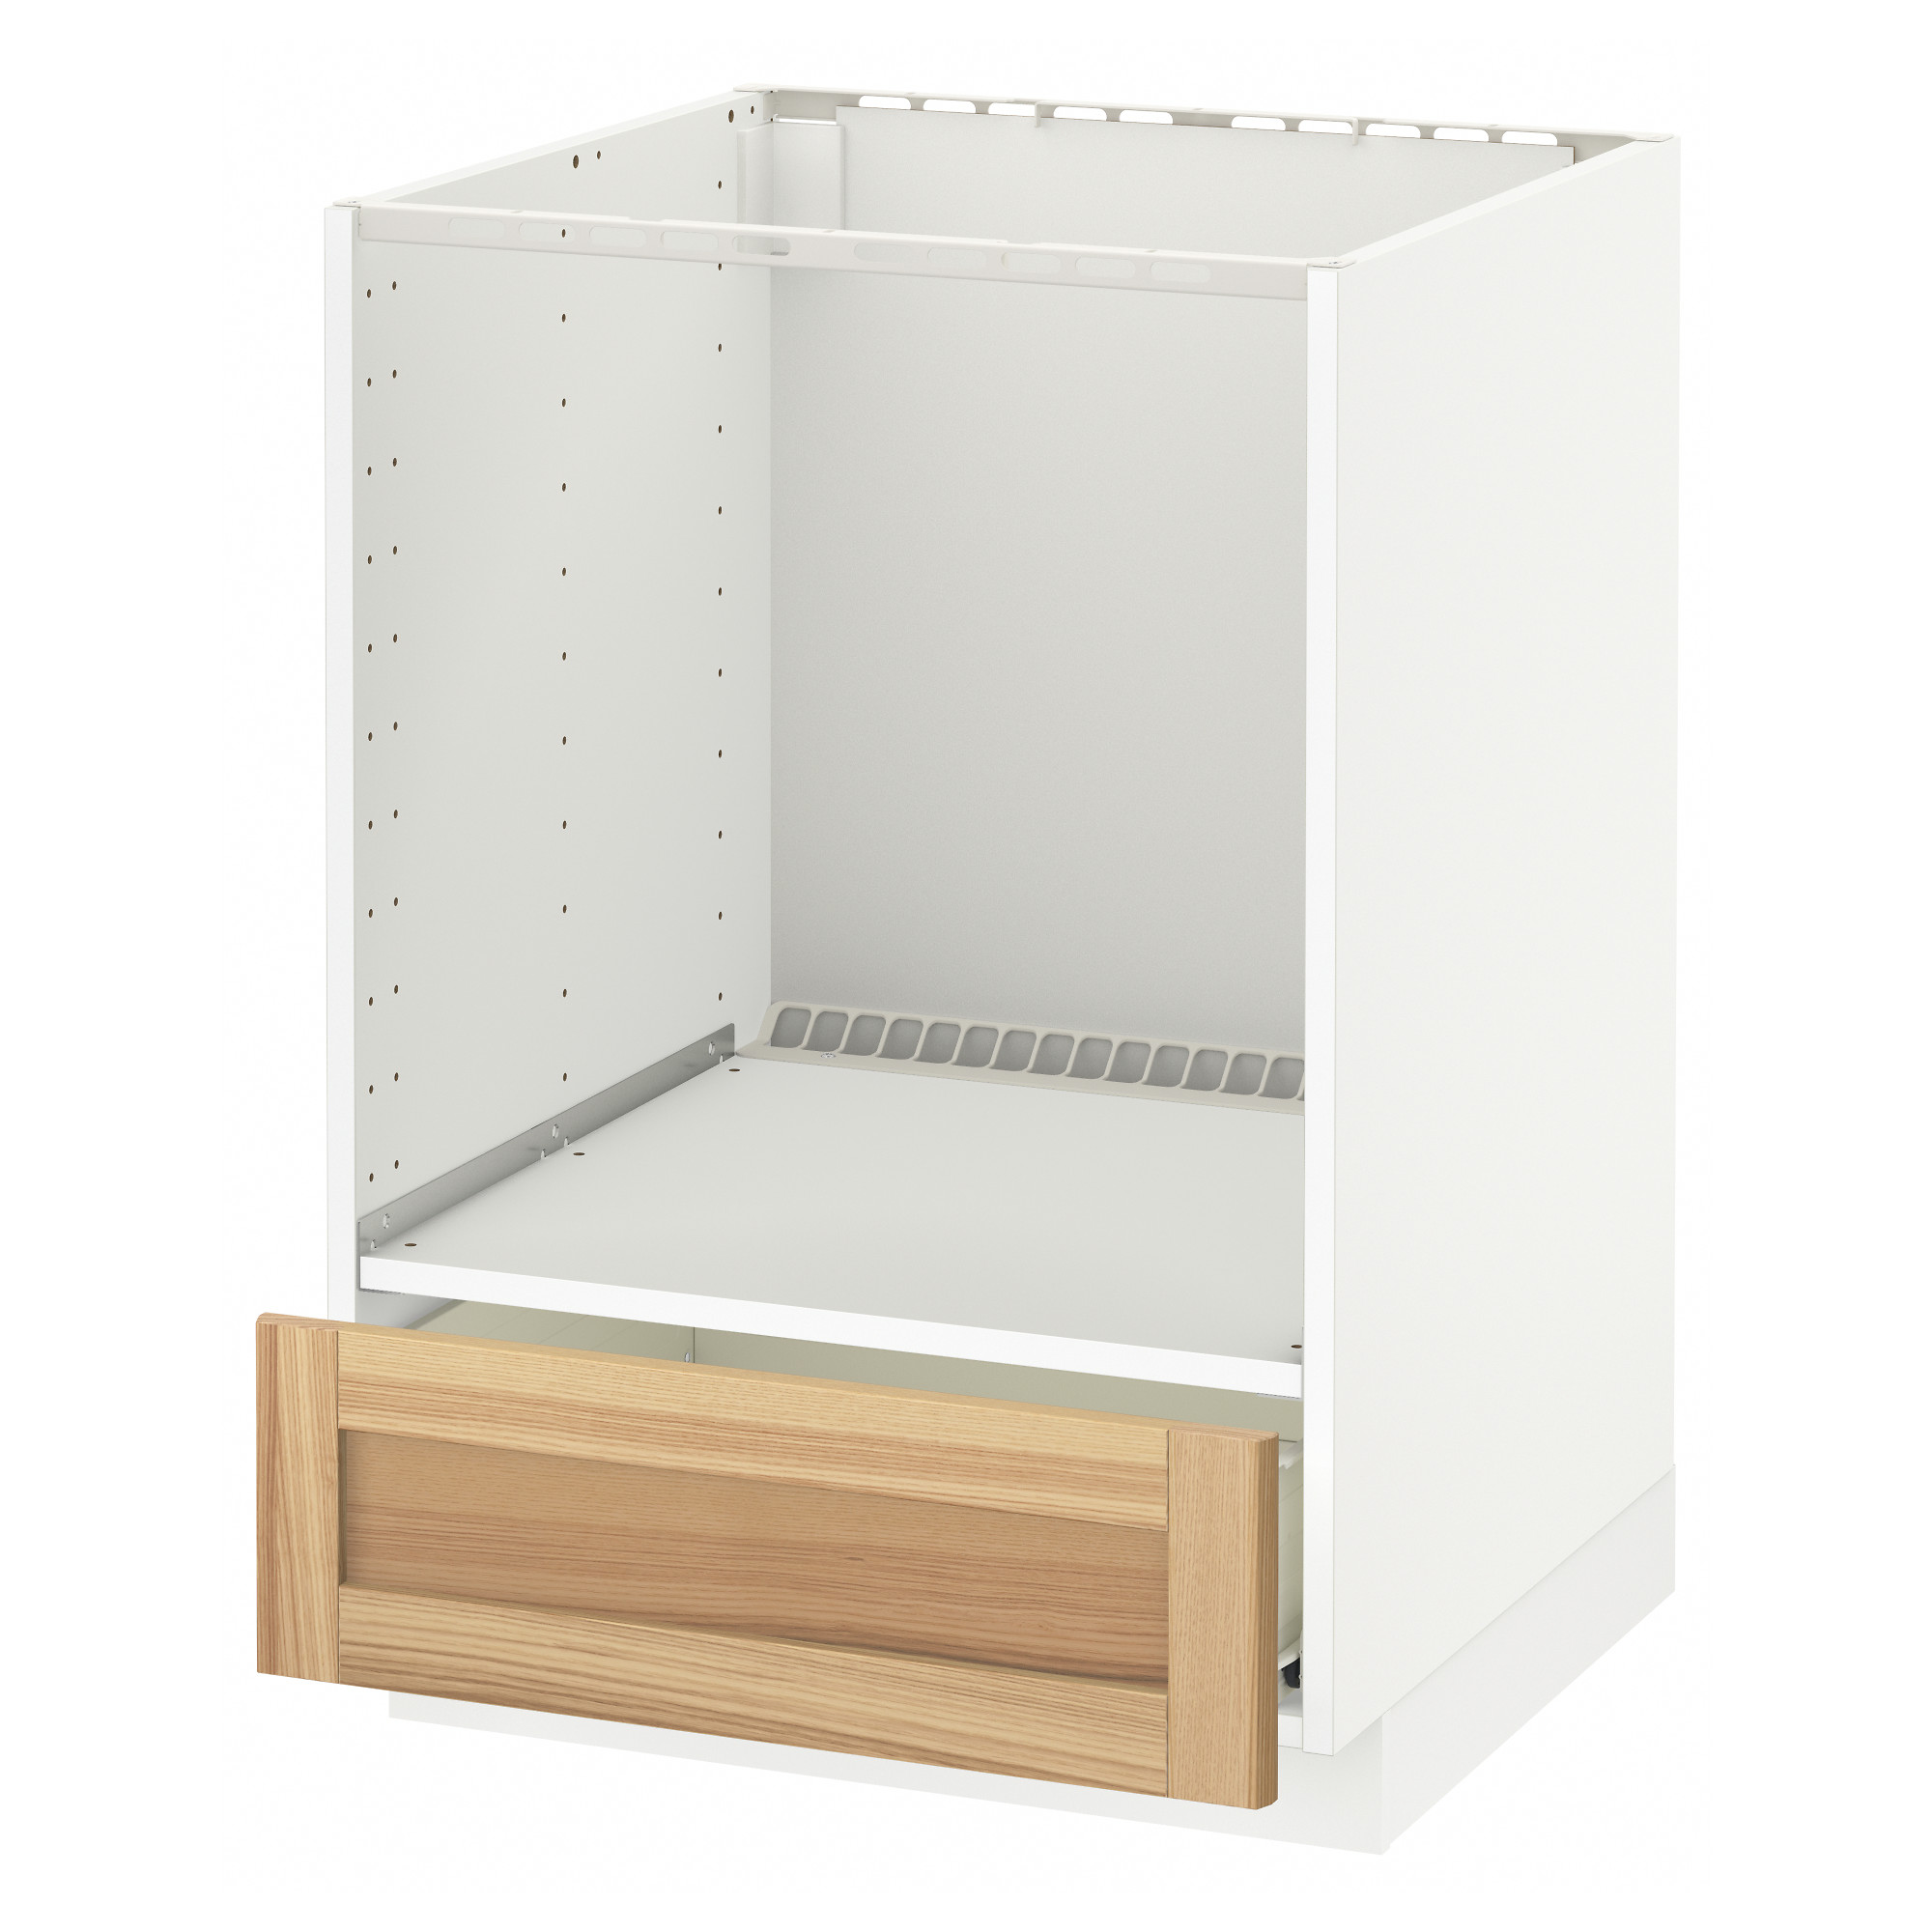 METOD base cabinet for oven with drawer